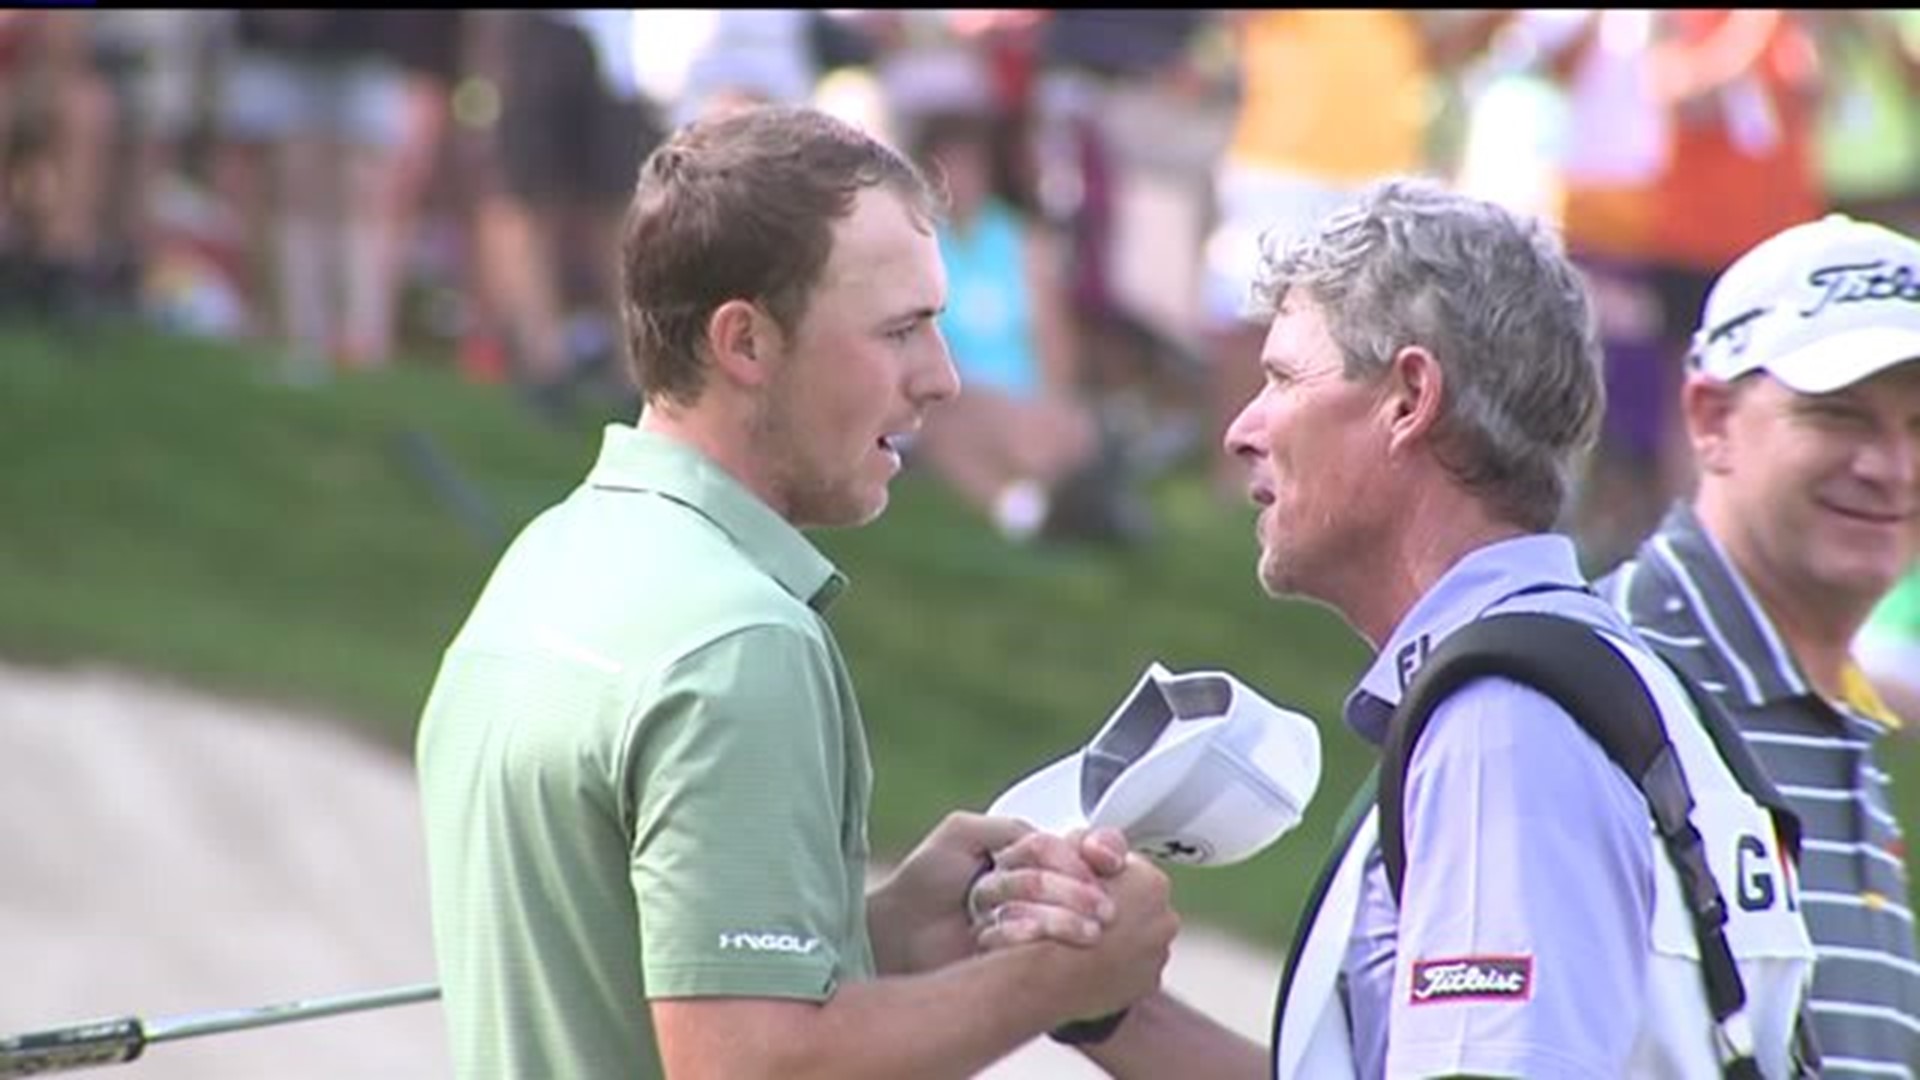 Pro breaks down championship day at the 2015 John Deere Classic